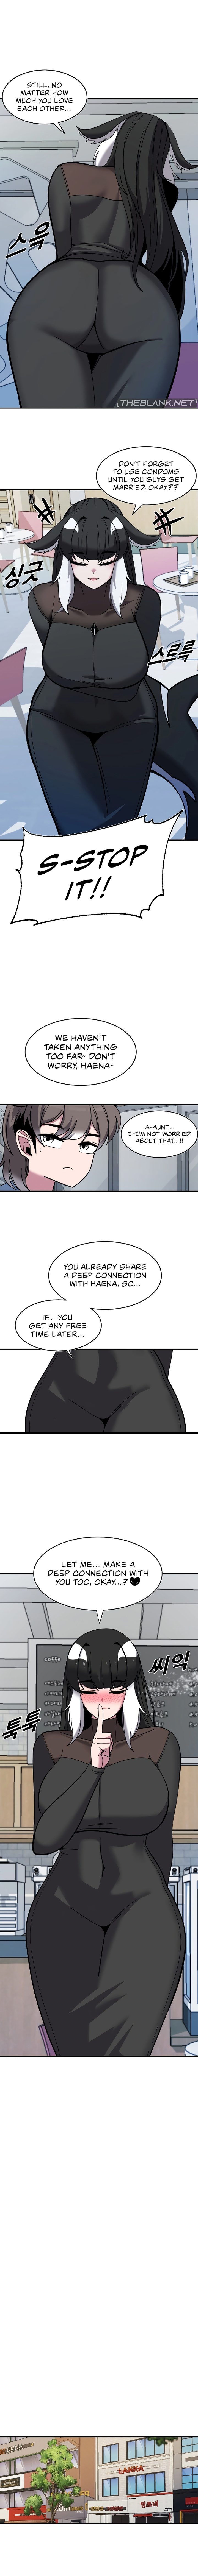 Double Life of Gukbap - Chapter 13 Page 6